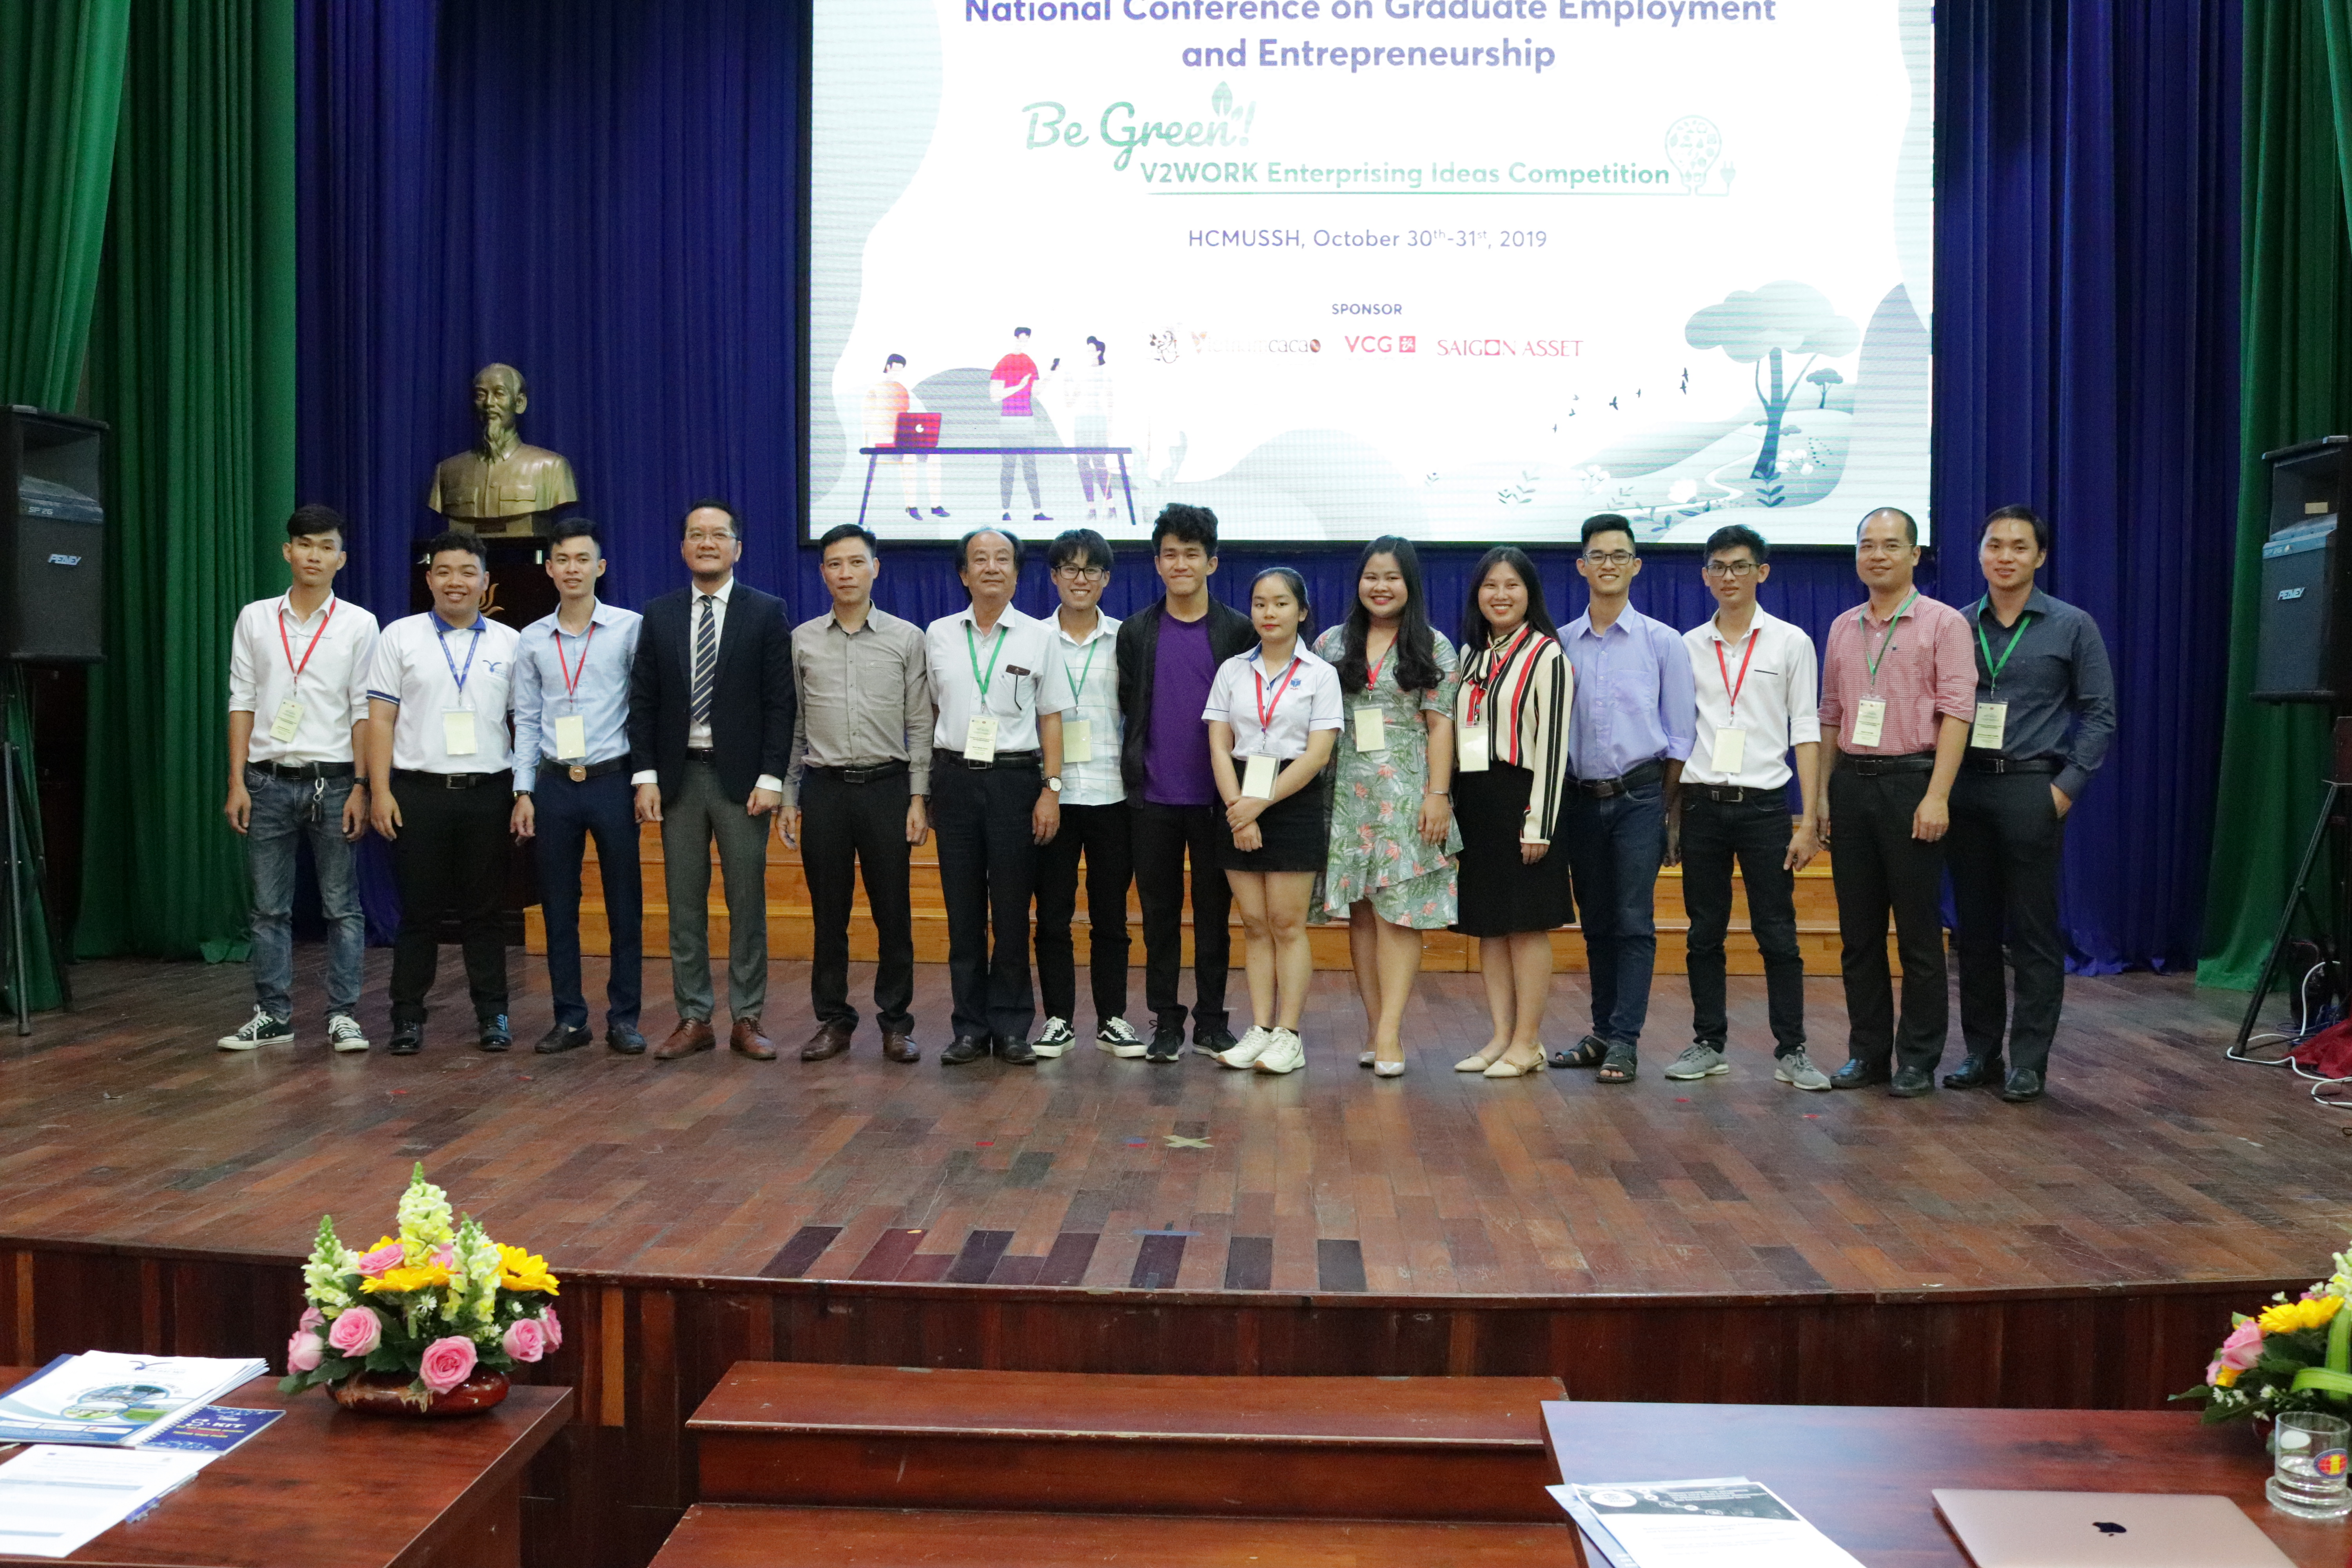 V2WORK National Conference EIC contestants and jury